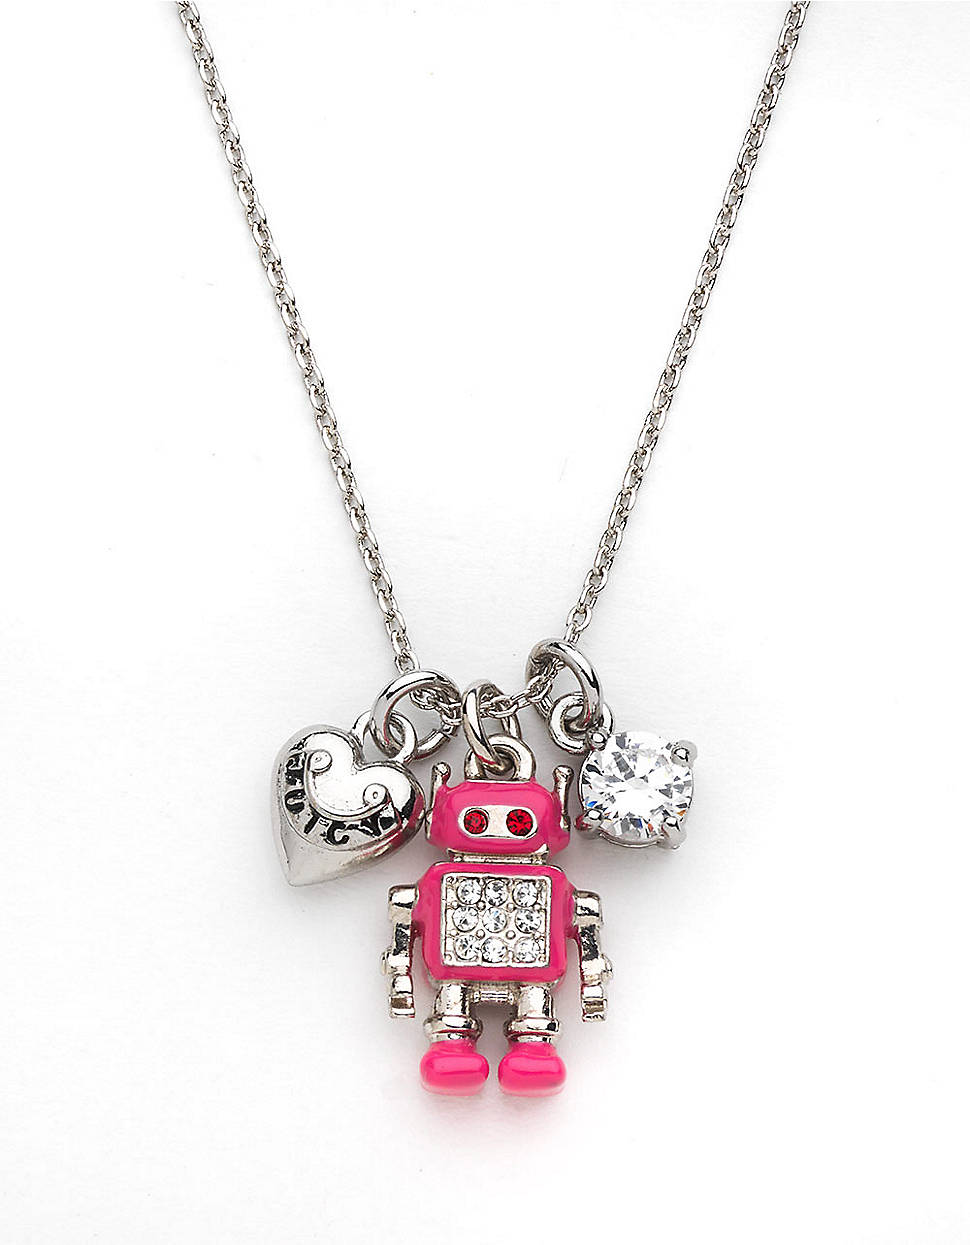 Lyst - Juicy Couture Embellished Robot Charm Pendant Necklace in Metallic